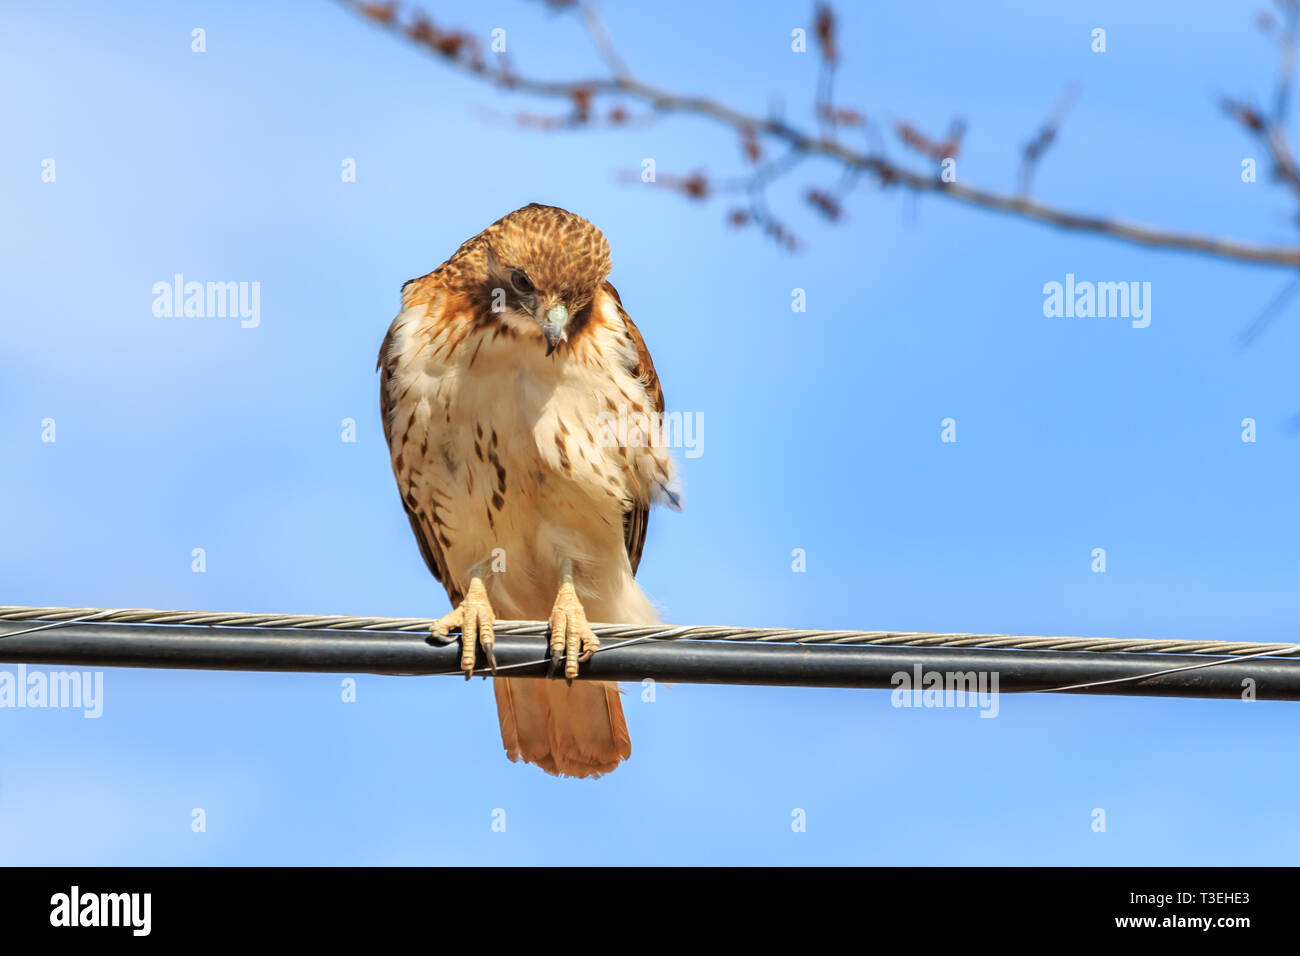 Red Tailed Hawk Perched High Resolution Stock Photography and Images ...